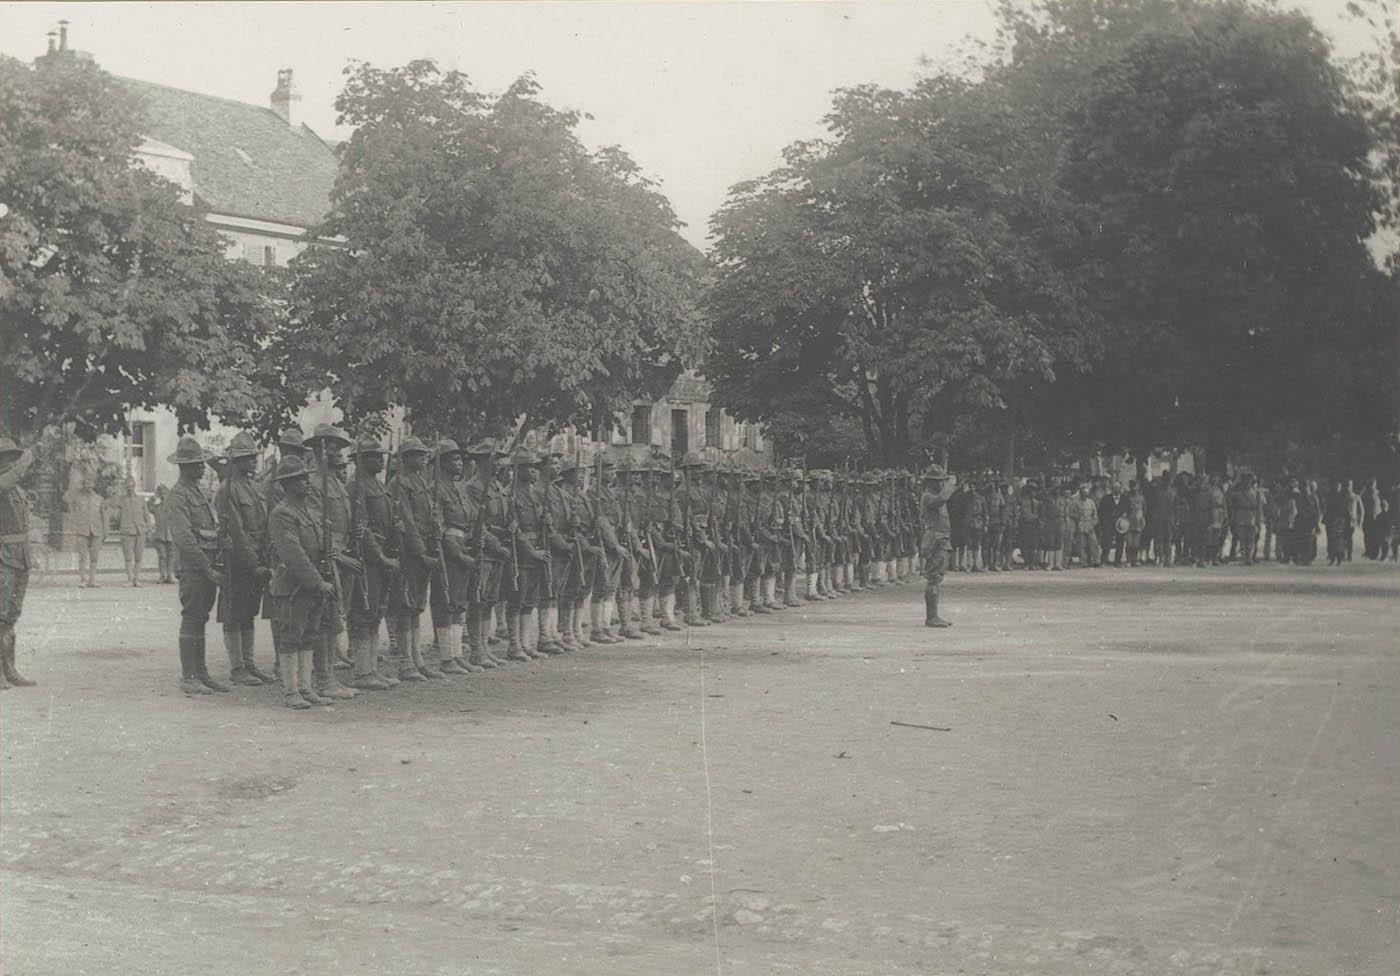 The 370th Infantry Regiment in France